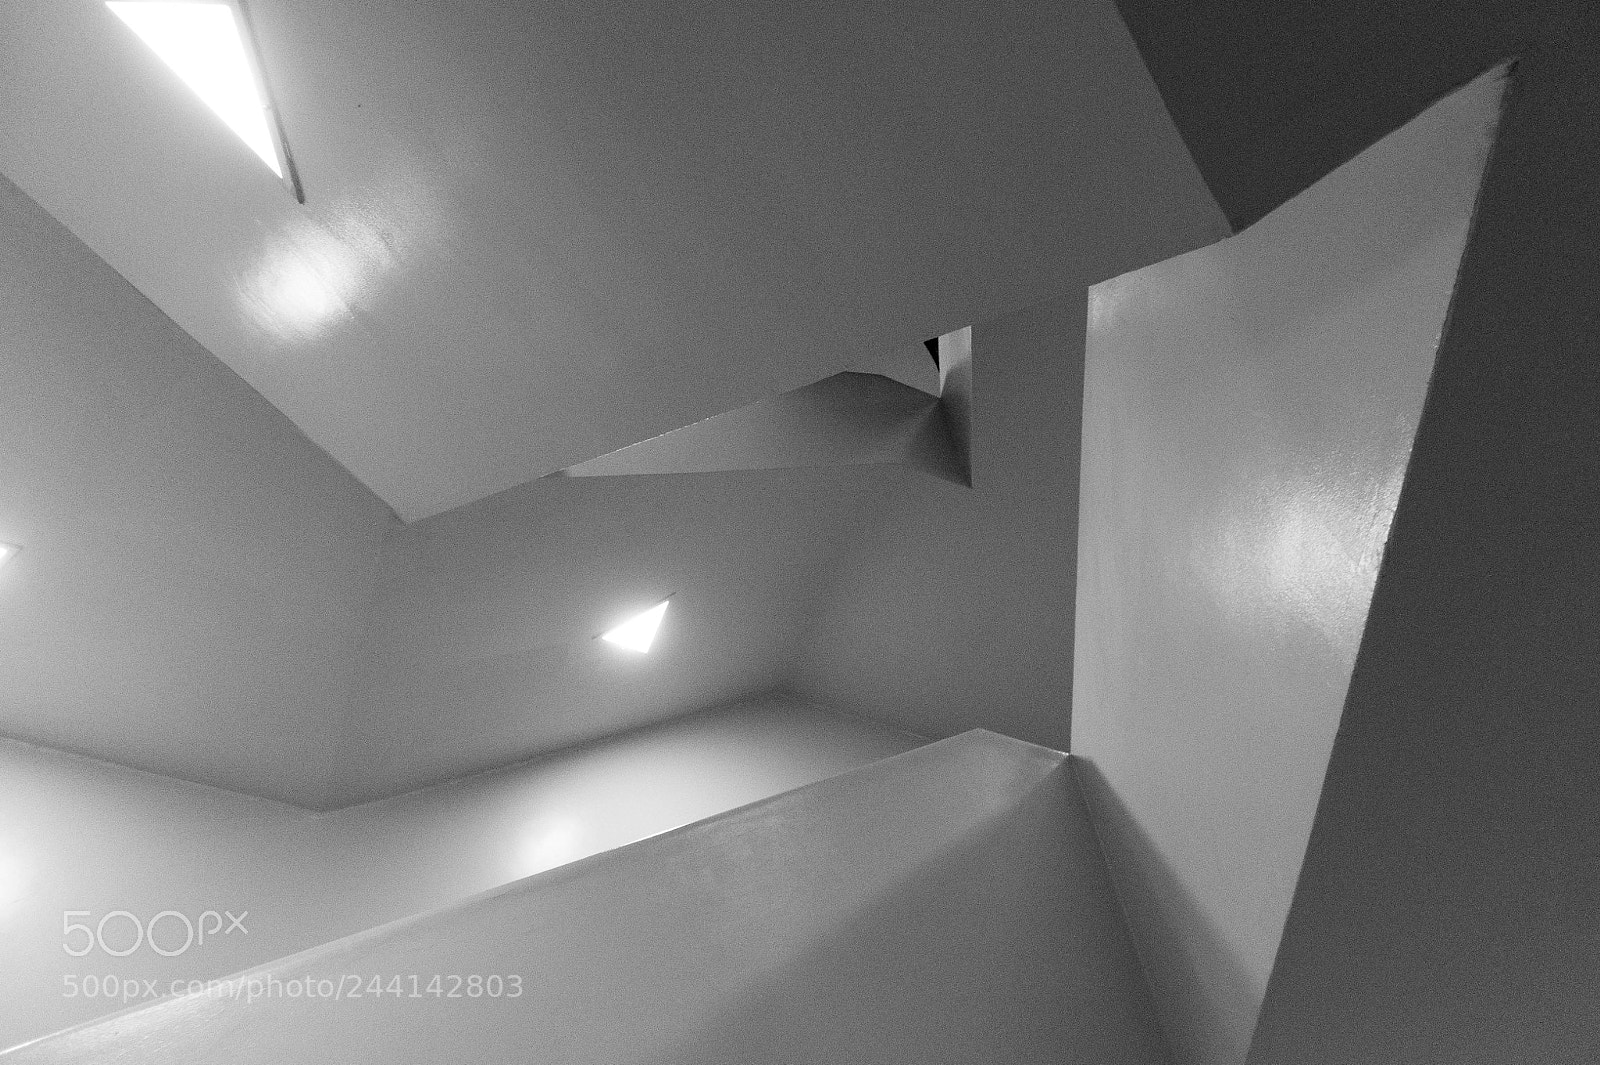 Nikon D90 sample photo. Guggenhiem staircase shapes photography